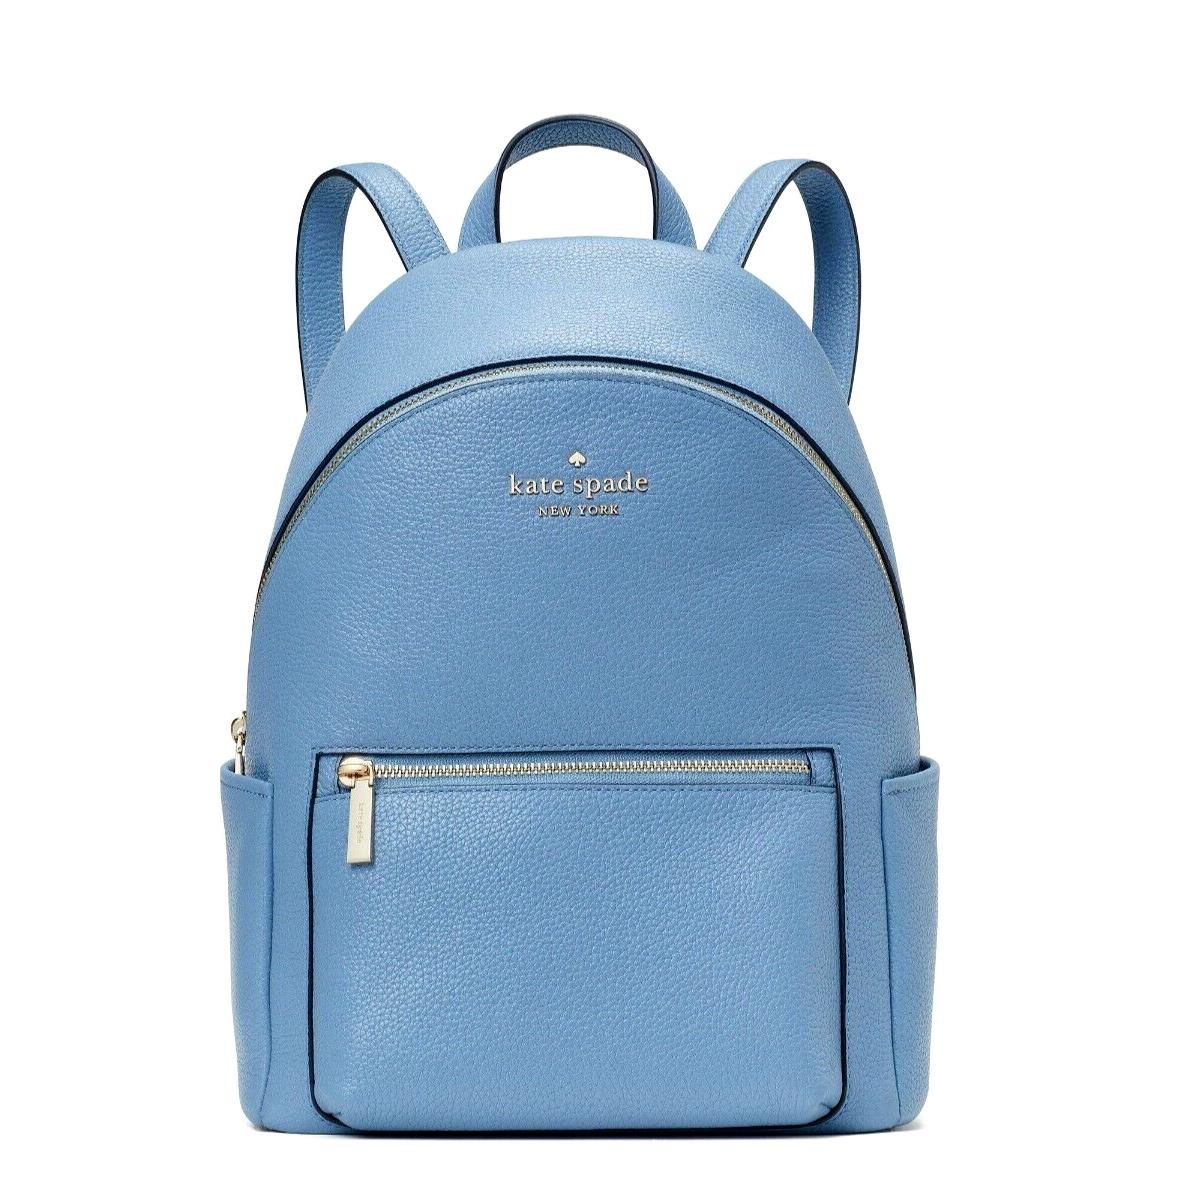 New Kate Spade Leila Medium Dome Backpack Leather Dusty Blue with Dust Bag